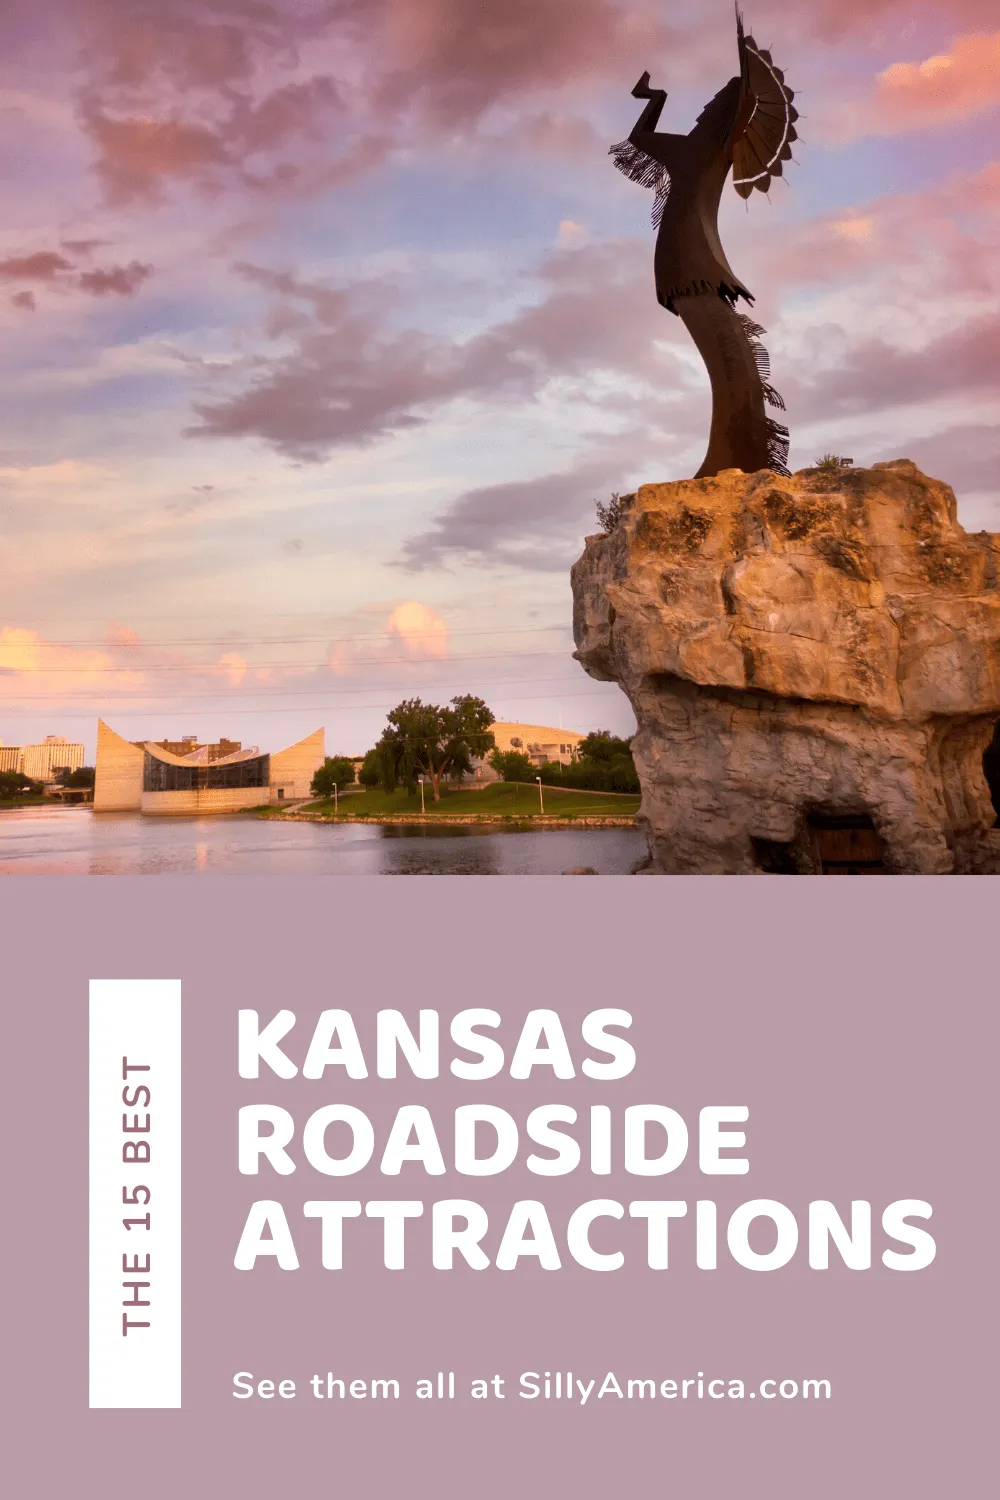 The best Kansas roadside attractions to visit on a Kansas road trip. Add these roadside oddities to your travel bucket list, itinerary, or route map! Visit these fun road trip stops for kids or adults. #KansasRoadsideAttractions #KansasRoadsideAttraction #RoadsideAttractions #RoadsideAttraction #RoadTrip #KansasRoadTrip #KansasRoadTripBucketLists #KansasBucketList #KansasPlacesToVisit #KansasTravel #ThingsToSeeInKansas #WeirdRoadsideAttractions